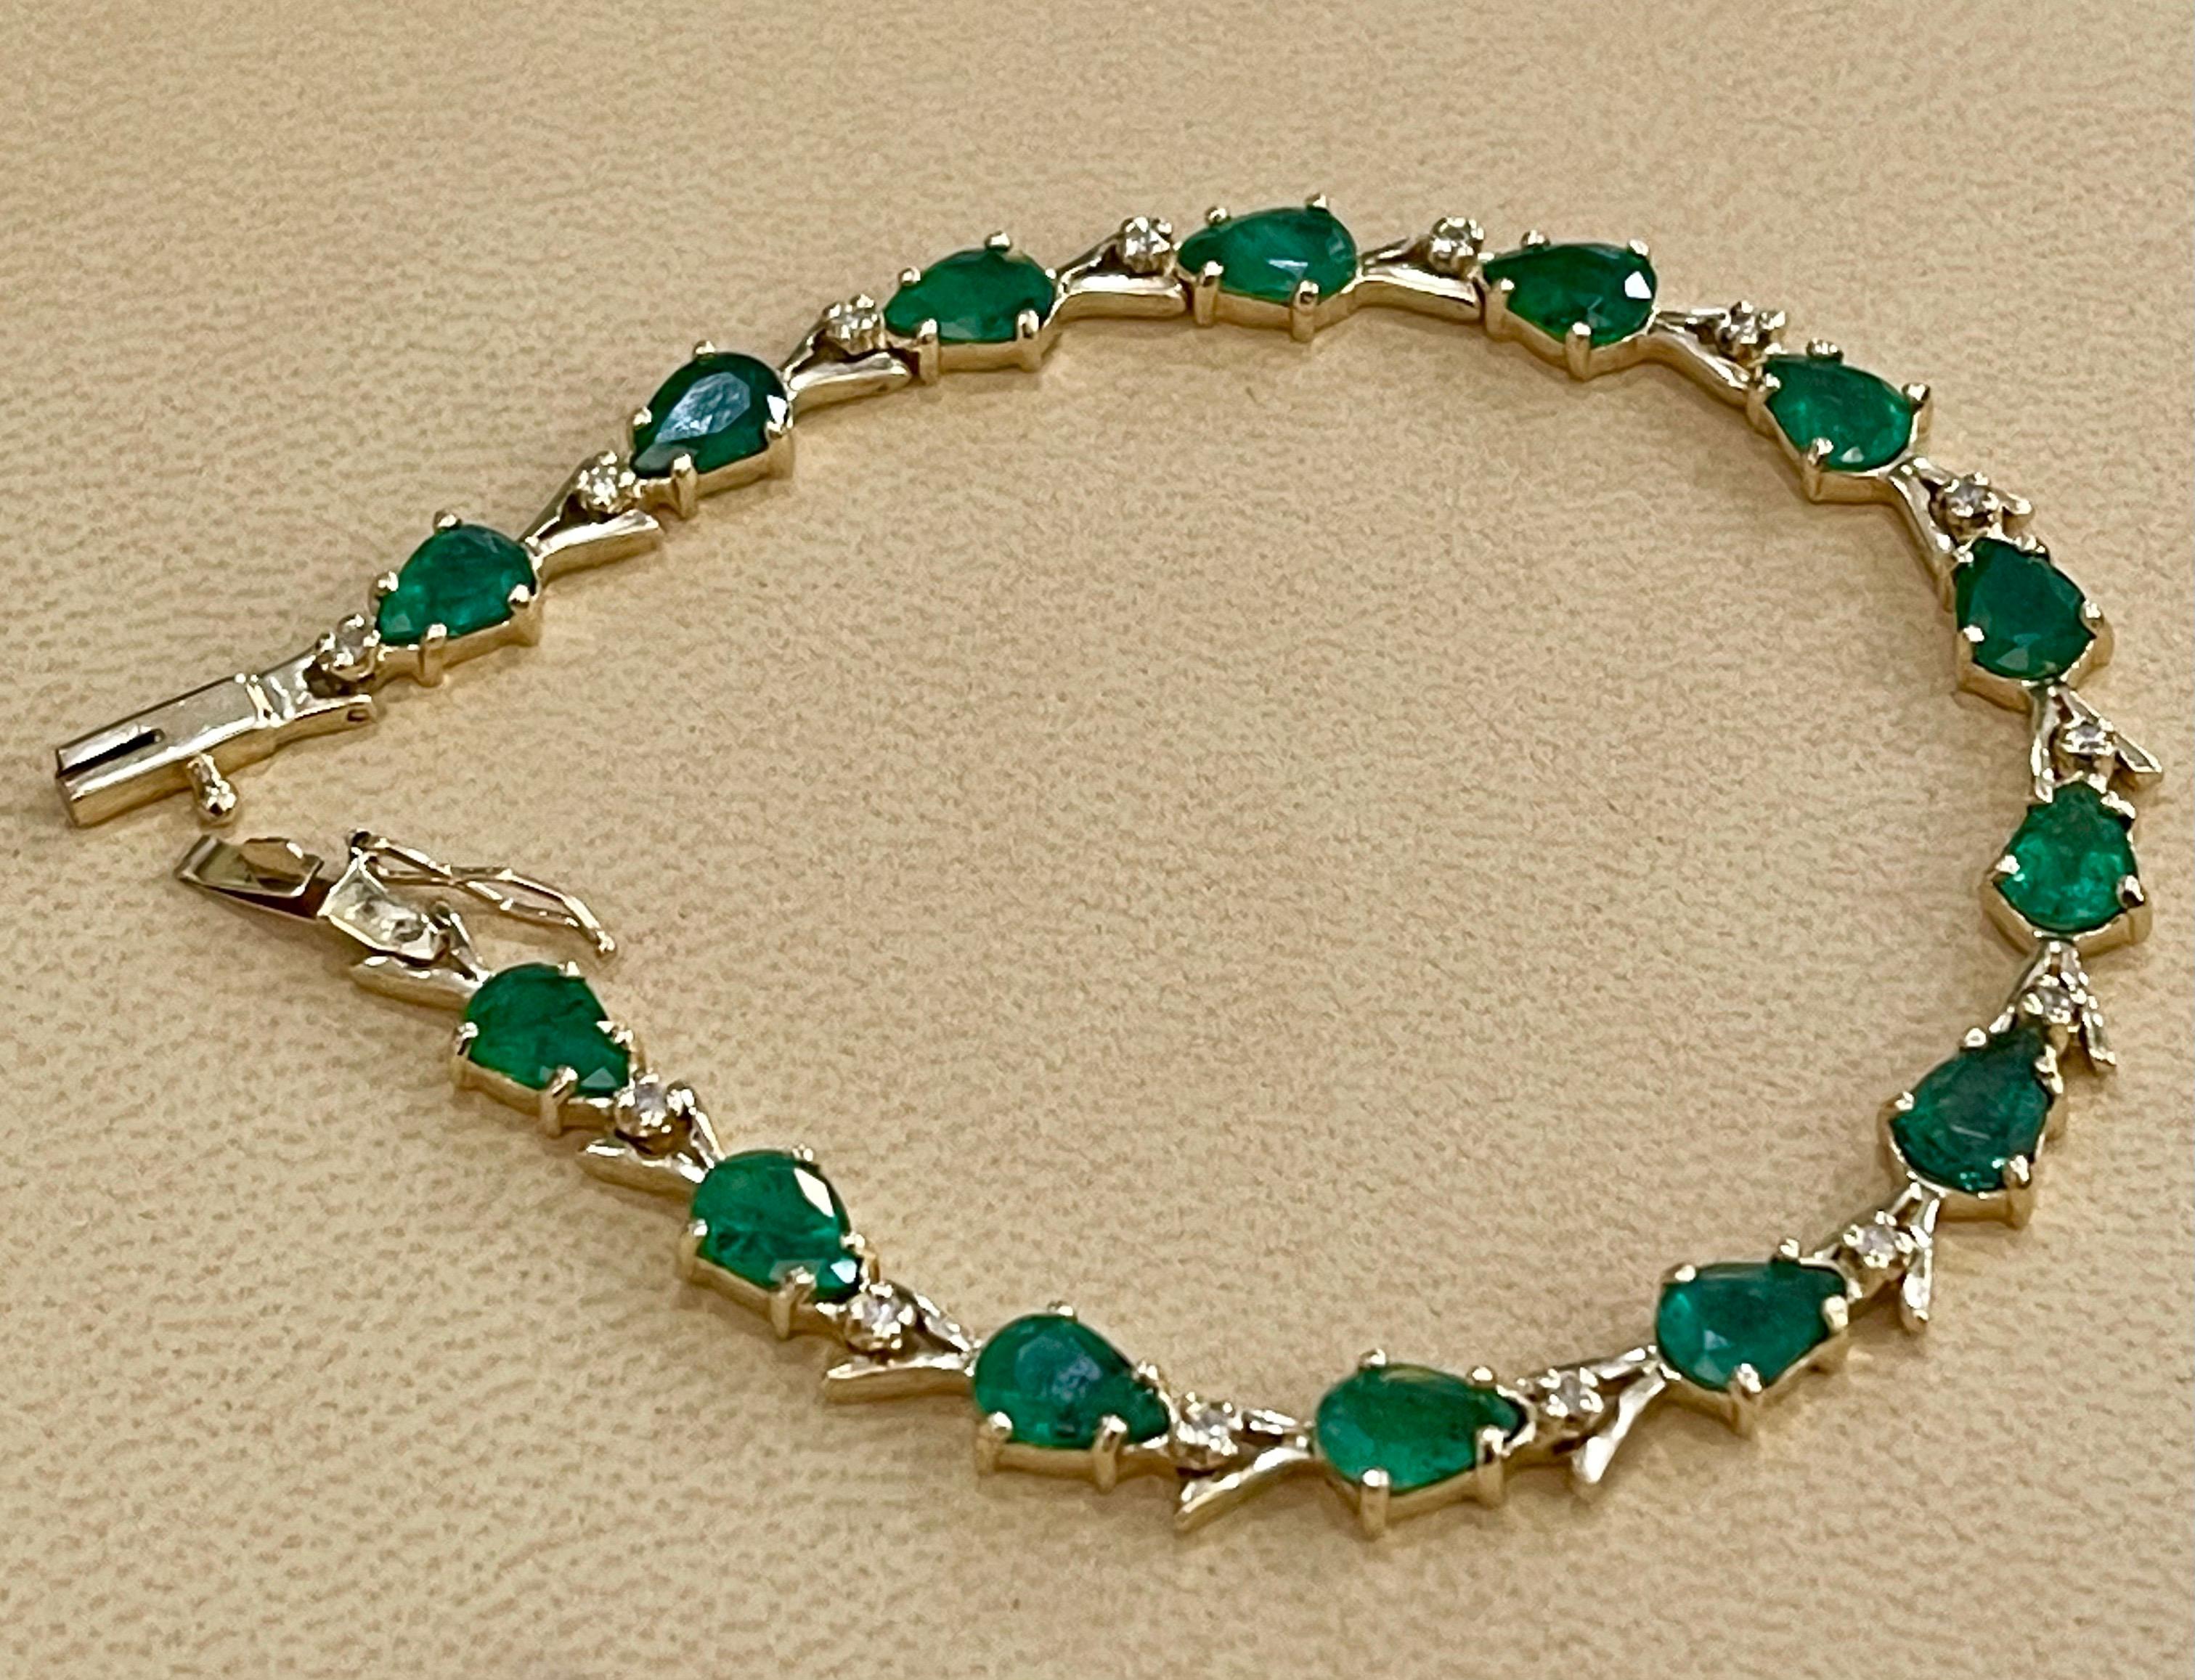  This exceptionally affordable Tennis  bracelet has  14 stones of Pear shape  Emeralds  . Each Emerald is spaced by a single diamond . Total weight of the Emeralds is  approximately 7 carat. Total number of diamonds are 14 and diamond weighs is